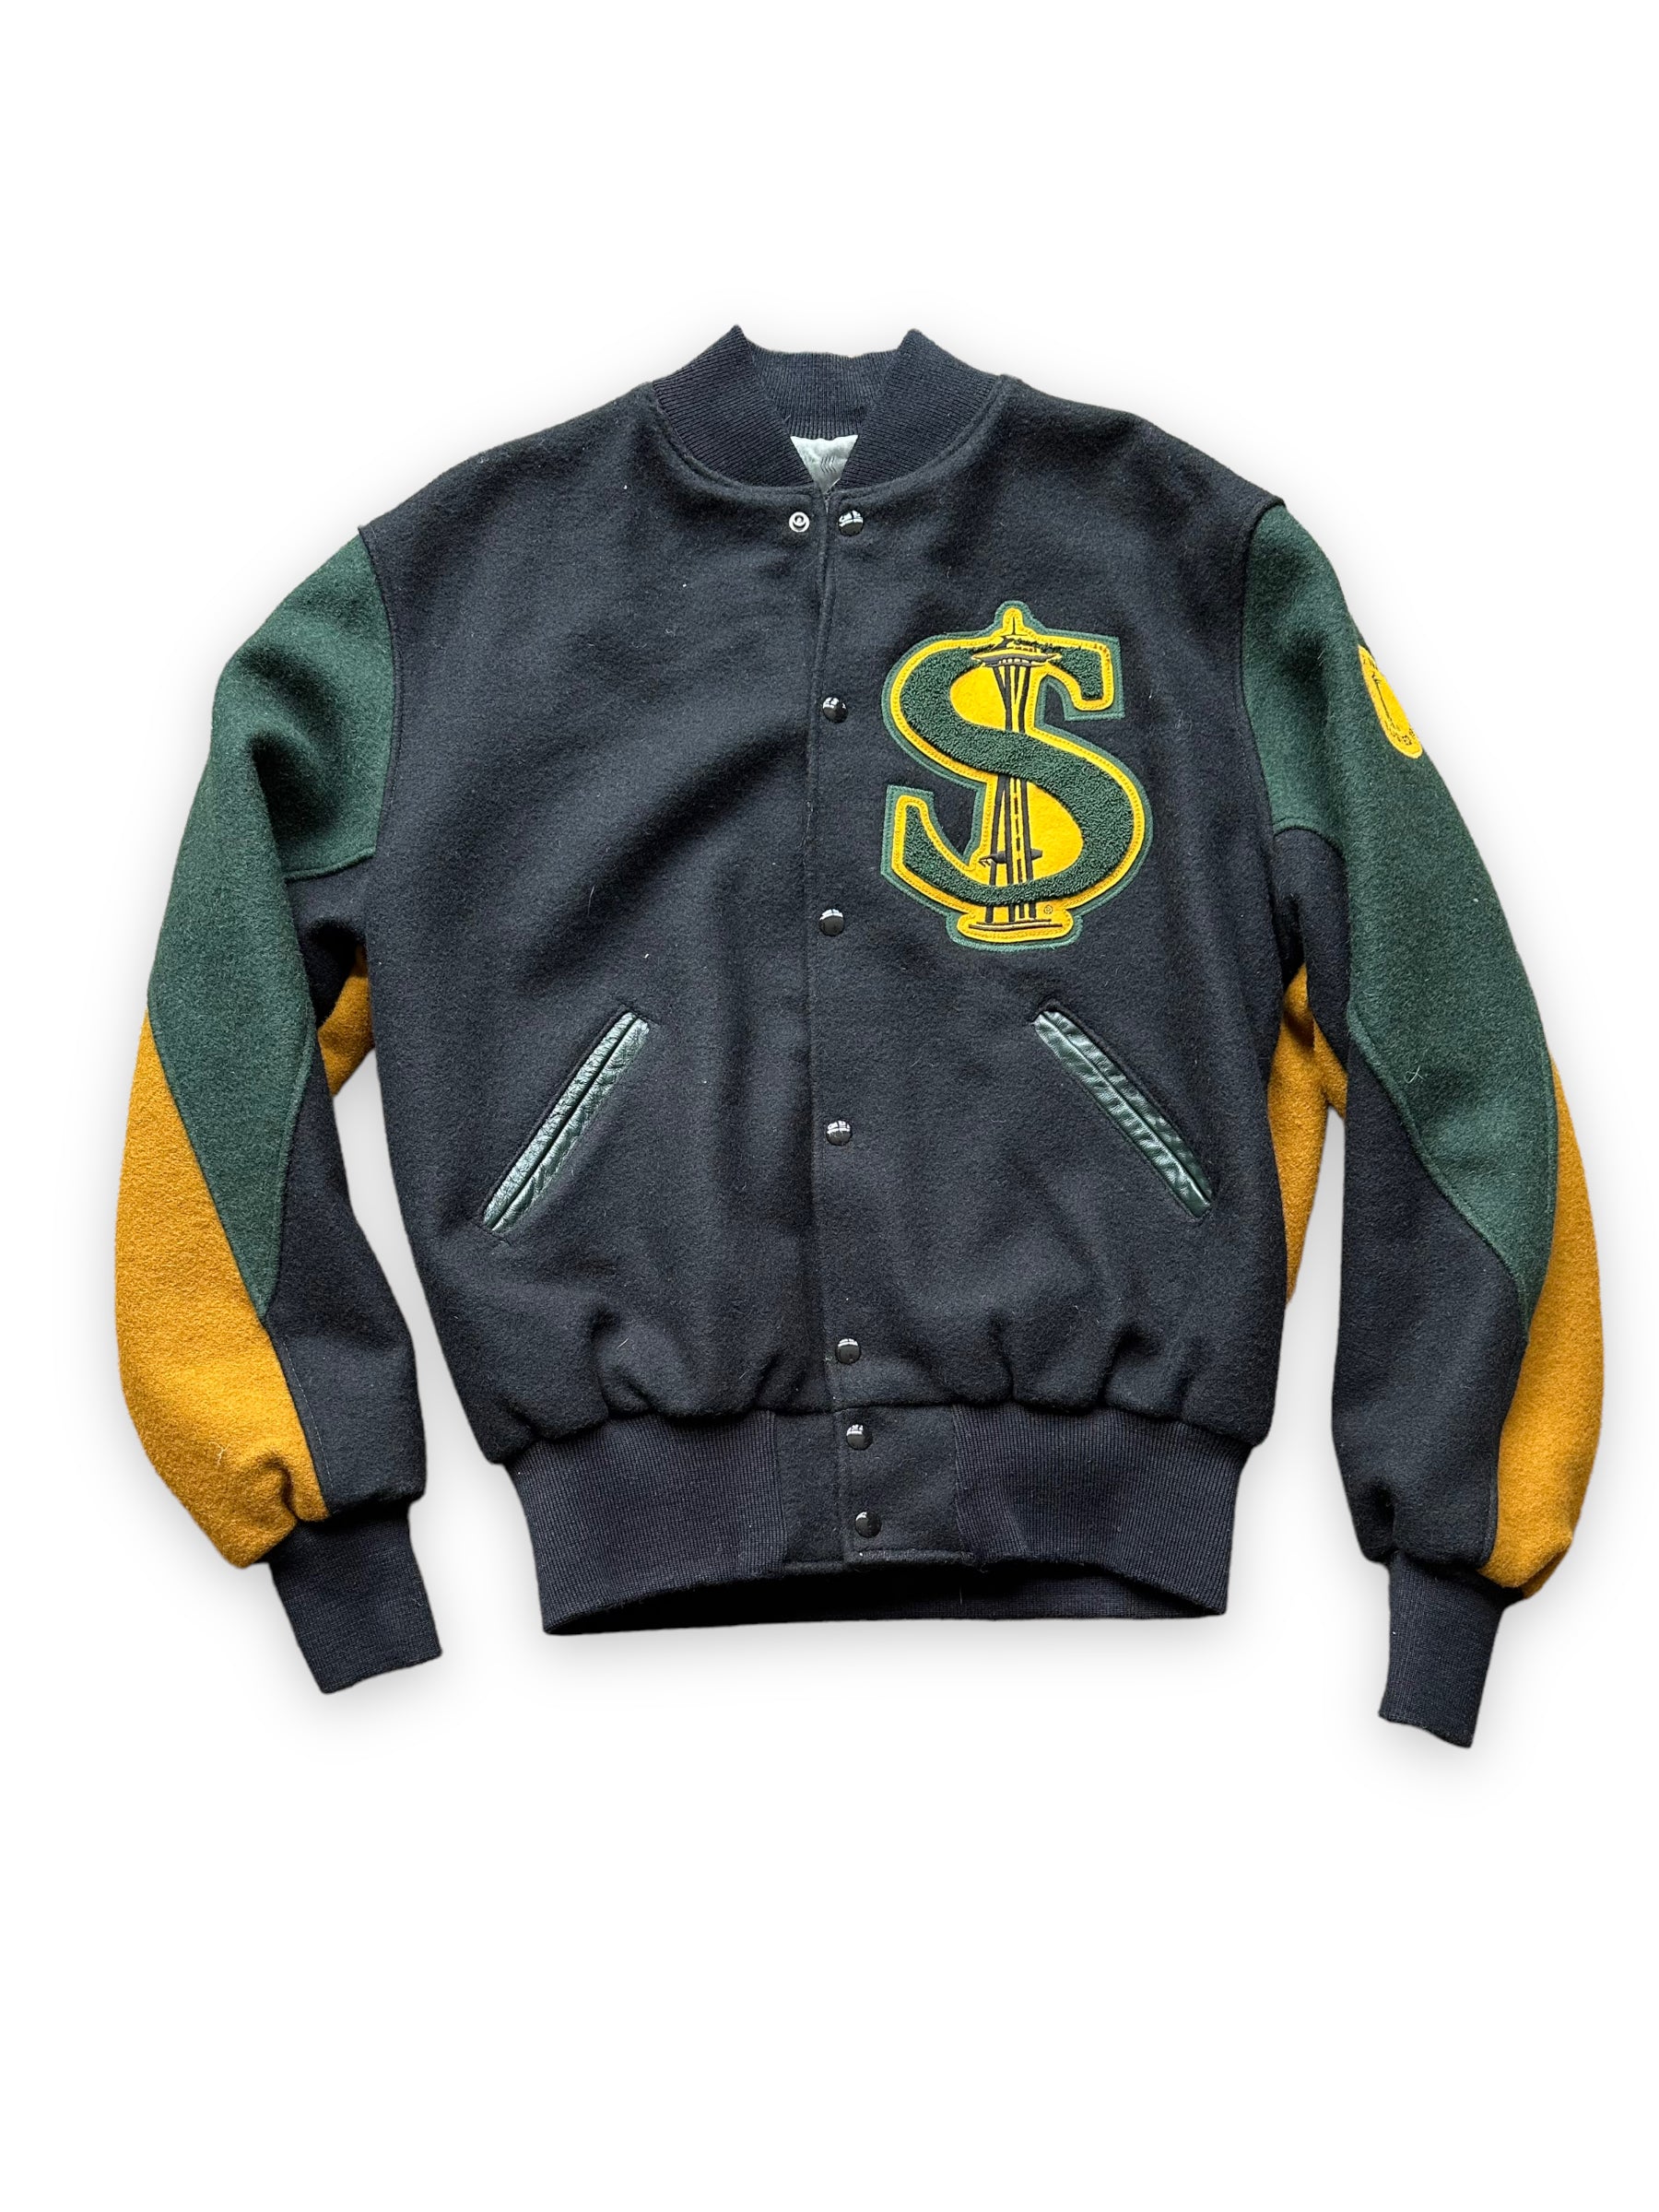 Front View of Seattle Supersonics Green Black and Yellow Prototype Jacket SZ L | Vintage Seattle Supersonics  | Seattle Vintage Basketball